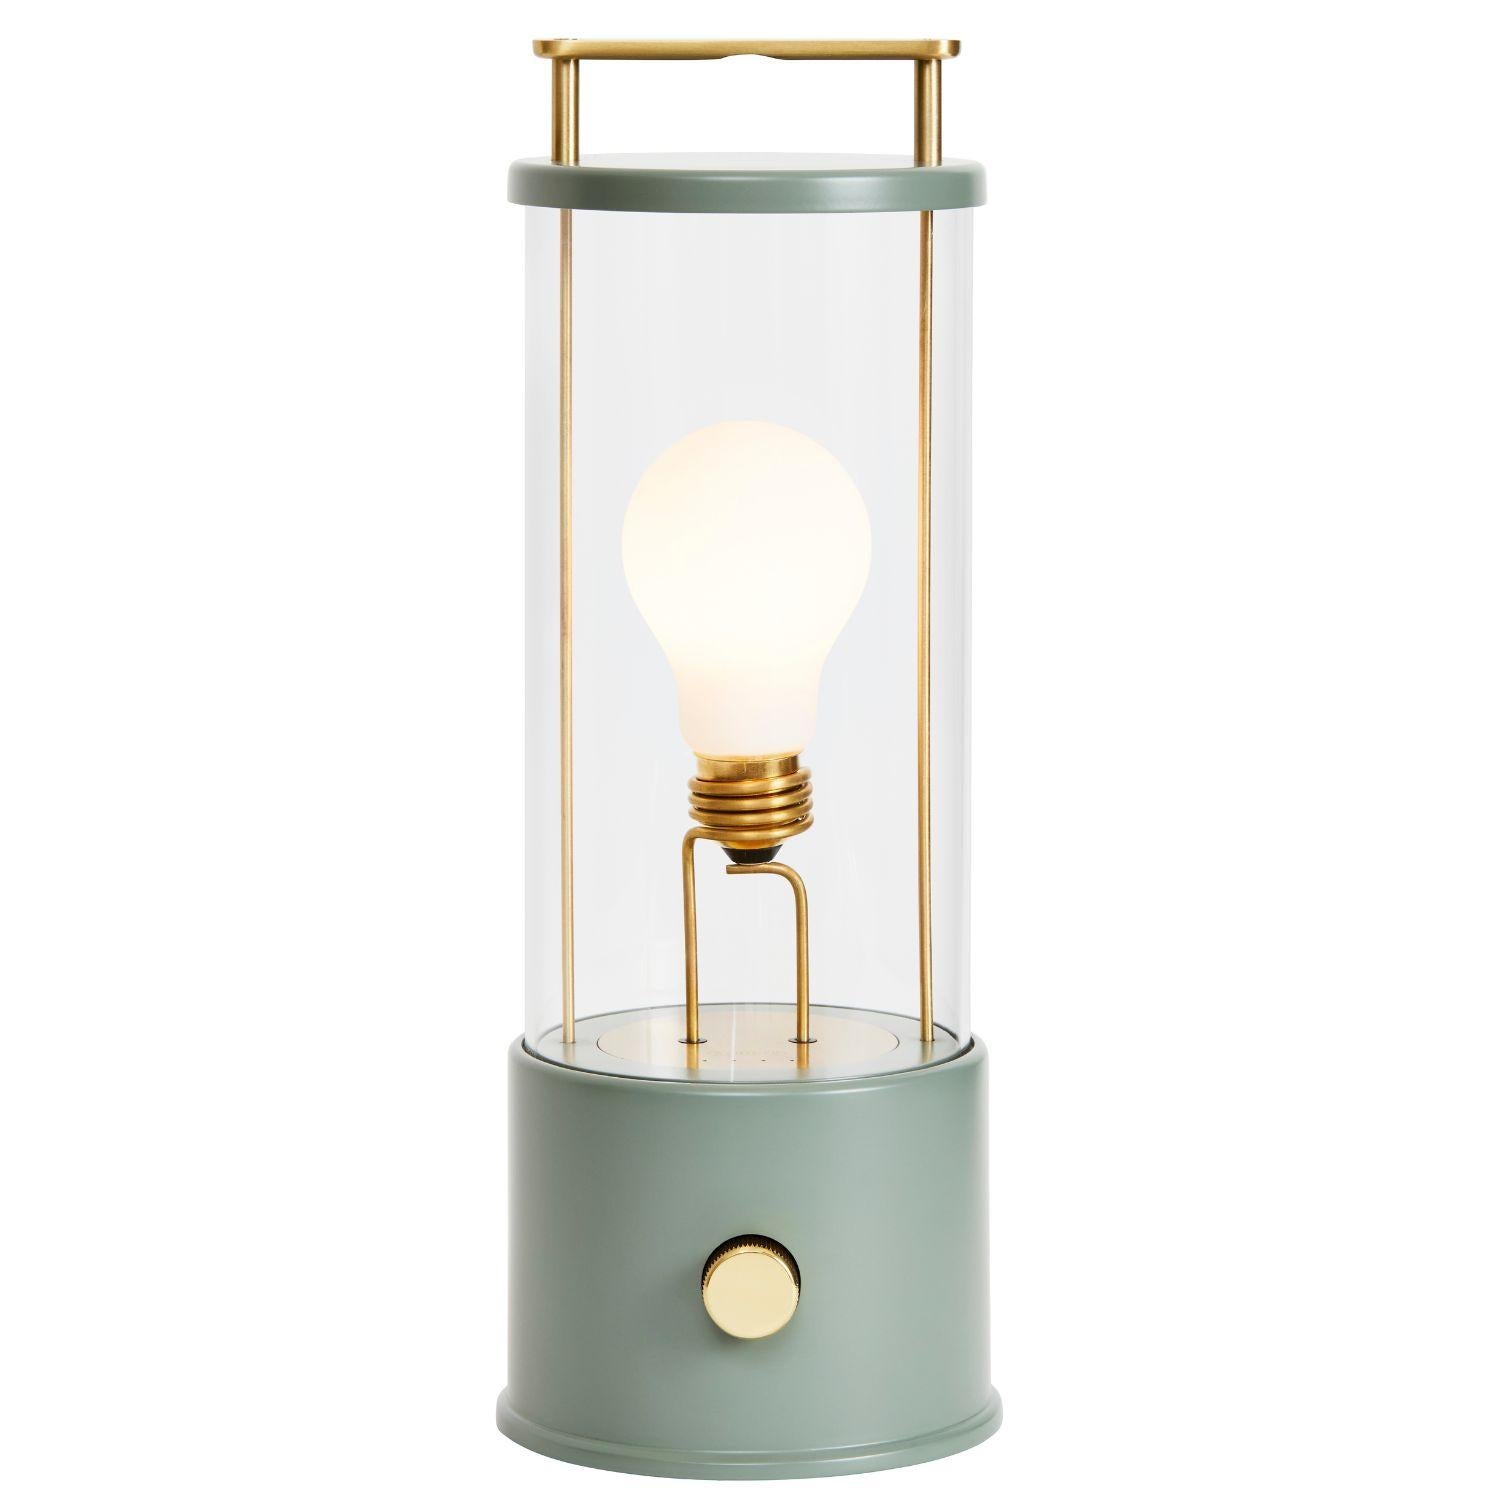 'The Muse' Portable Lamp in Selvedge Blue by Farrow & Ball for Tala For Sale 8